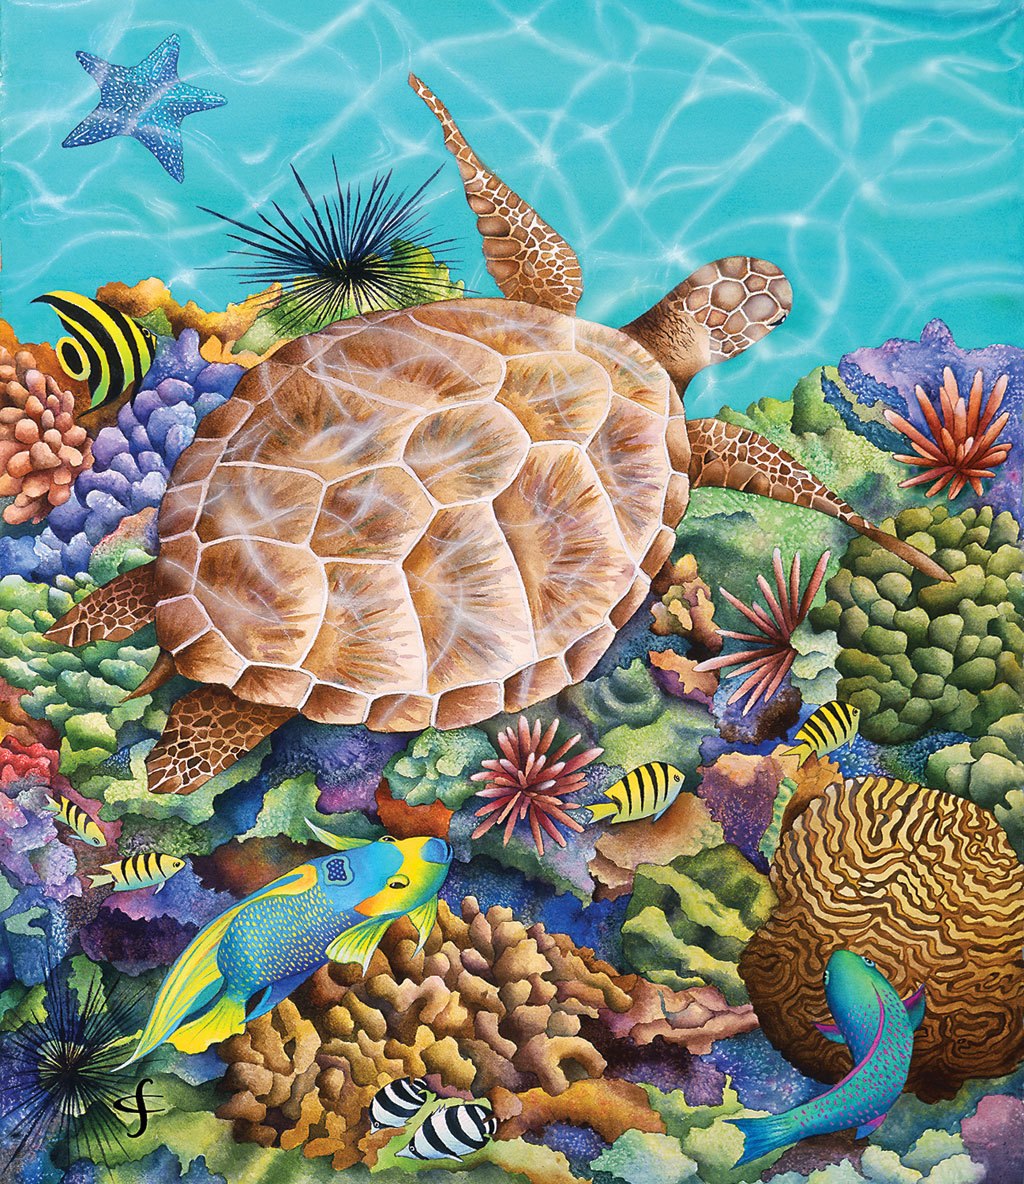 Turtle Pool - 200pc Jigsaw Puzzle by Sunsout